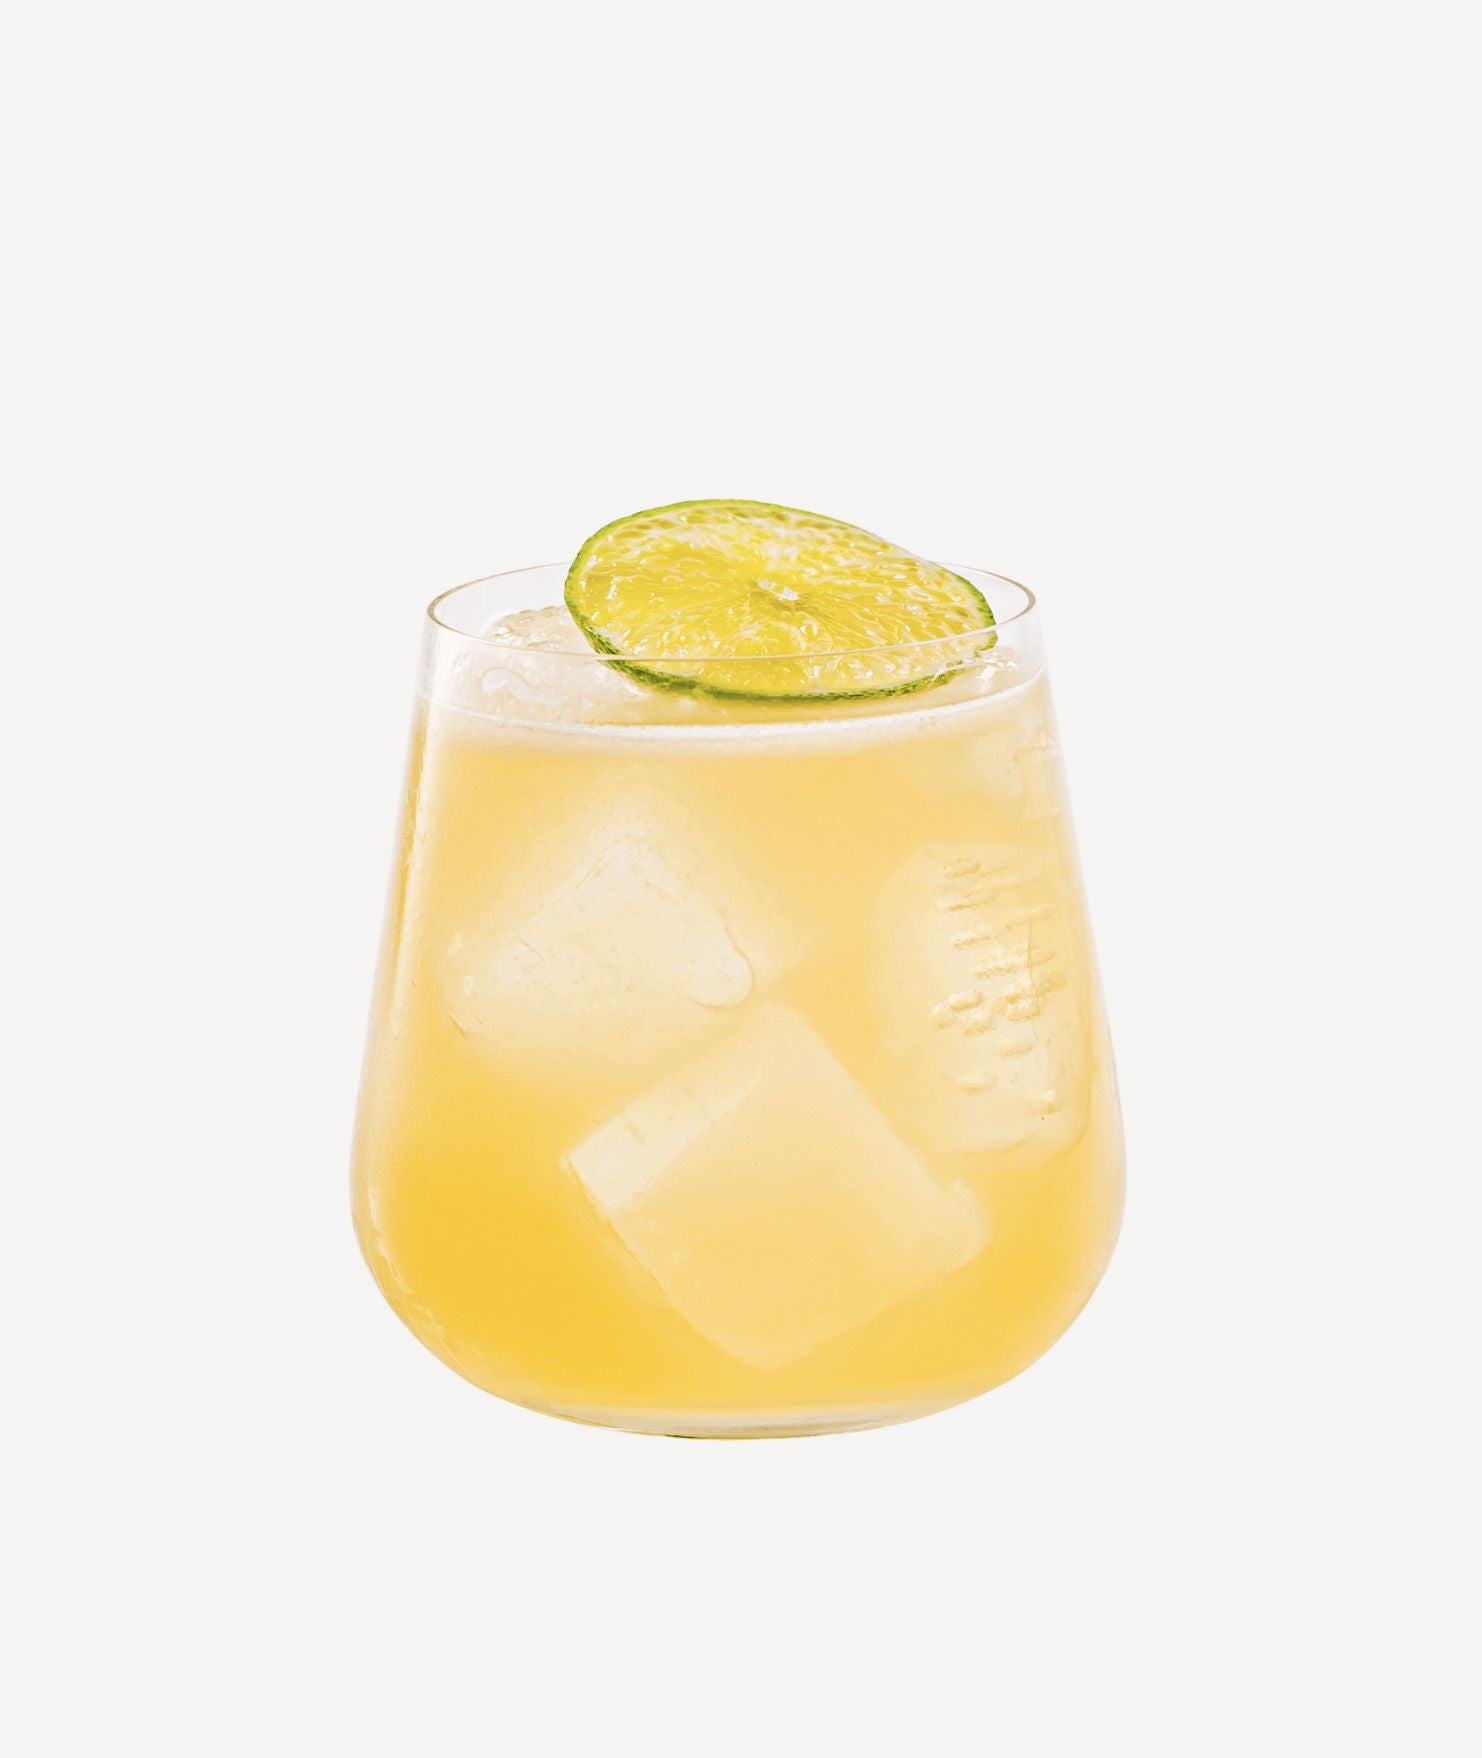 Cocktail image